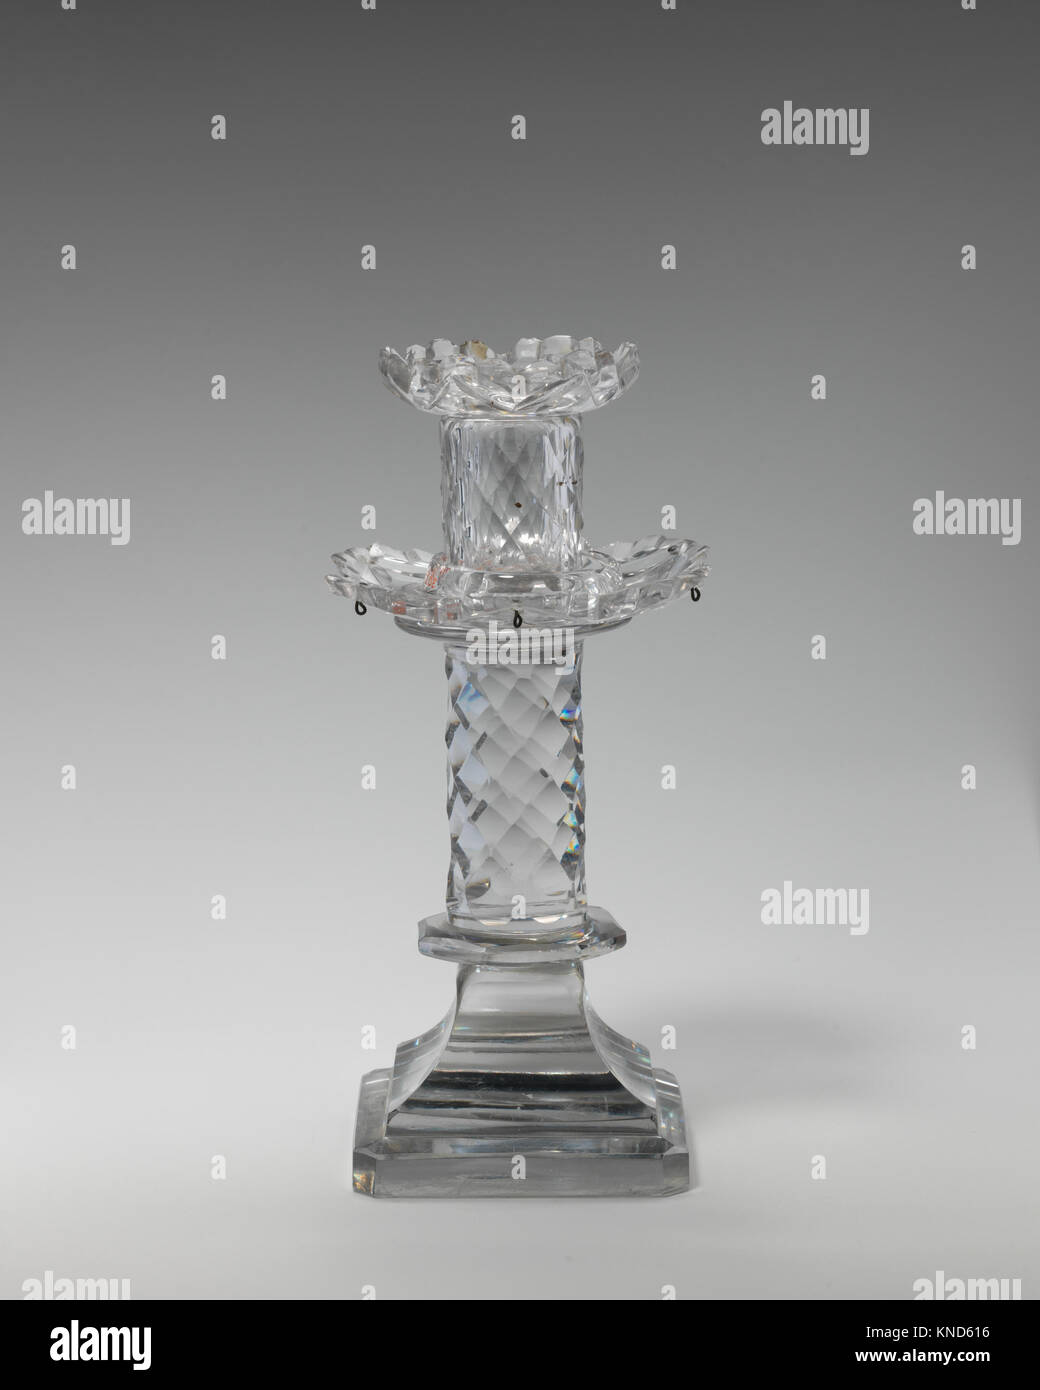 Candlestick MET DP-1588-035 196665 British or Irish, Candlestick, late 18th?early 19th century, Glass, H. 8 in.  (20.3 cm). The Metropolitan Museum of Art, New York. The Sylmaris Collection, Gift of George Coe Graves, 1930 (30.120.267a, b) Stock Photo